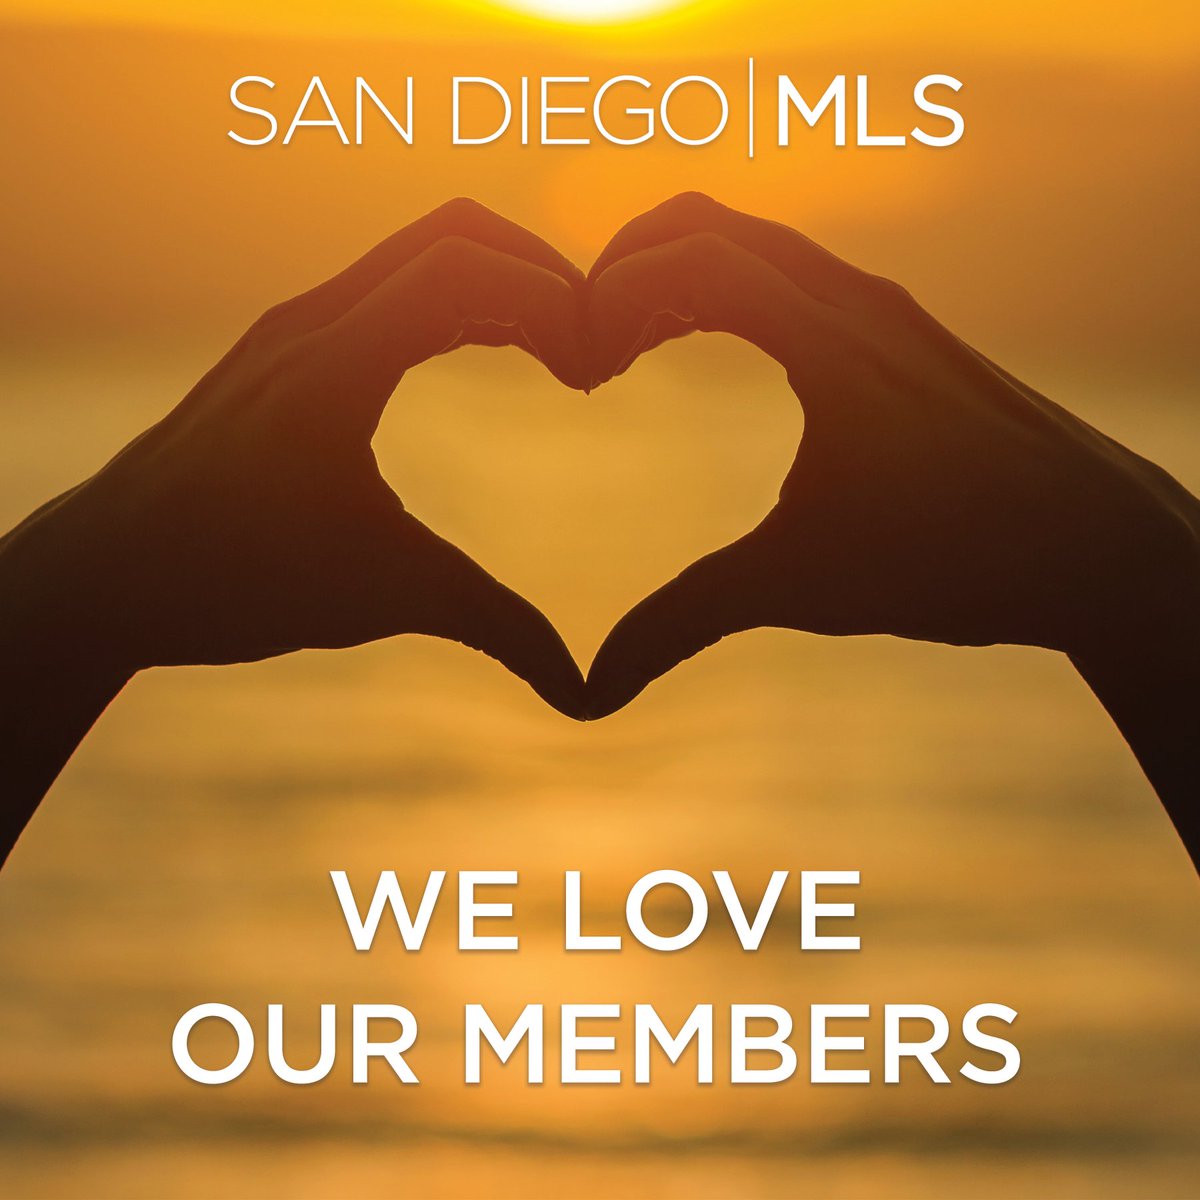 We hope you have a wonderful Valentine’s Day! 💌 We love our members and are so glad we get to support you and your business every day. 

#sandiegorealtor #sandiegohomes